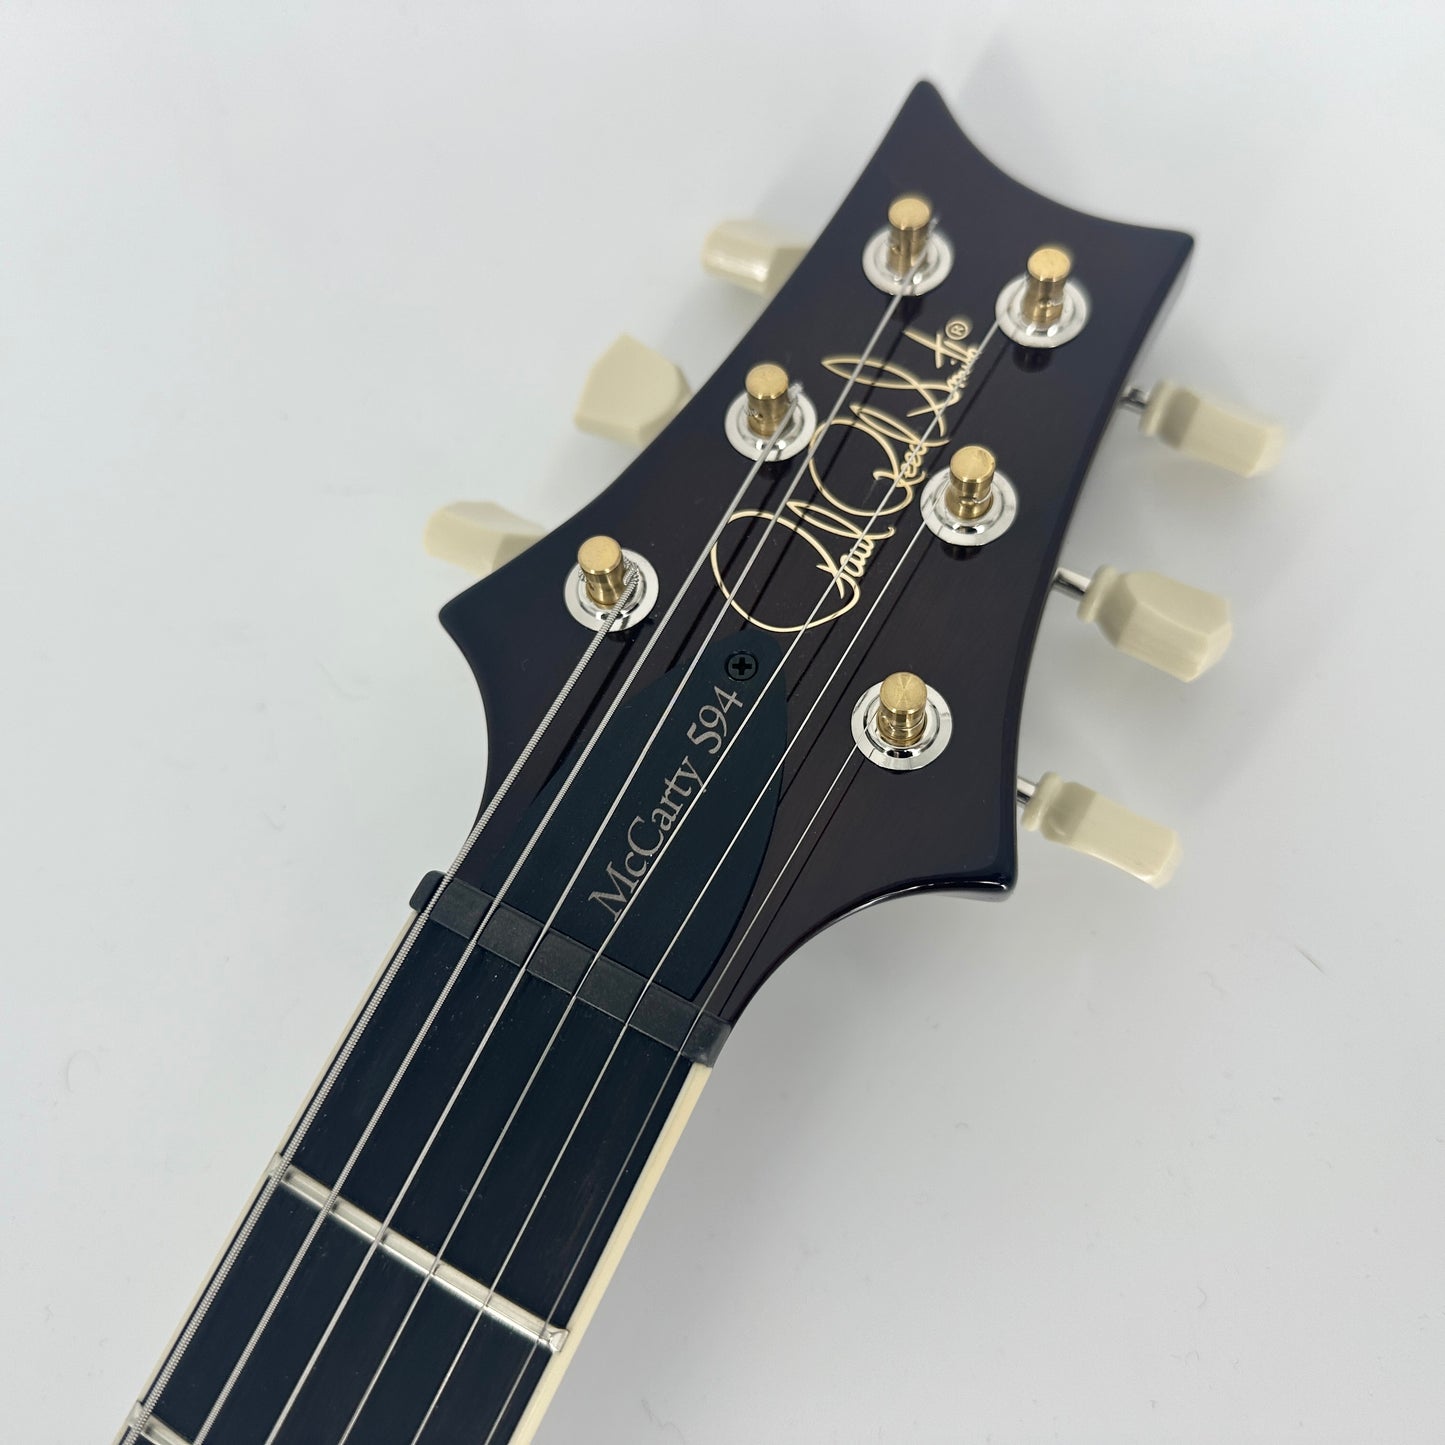 2023 PRS S2 McCarty 594 Limited Edition - Black Gold